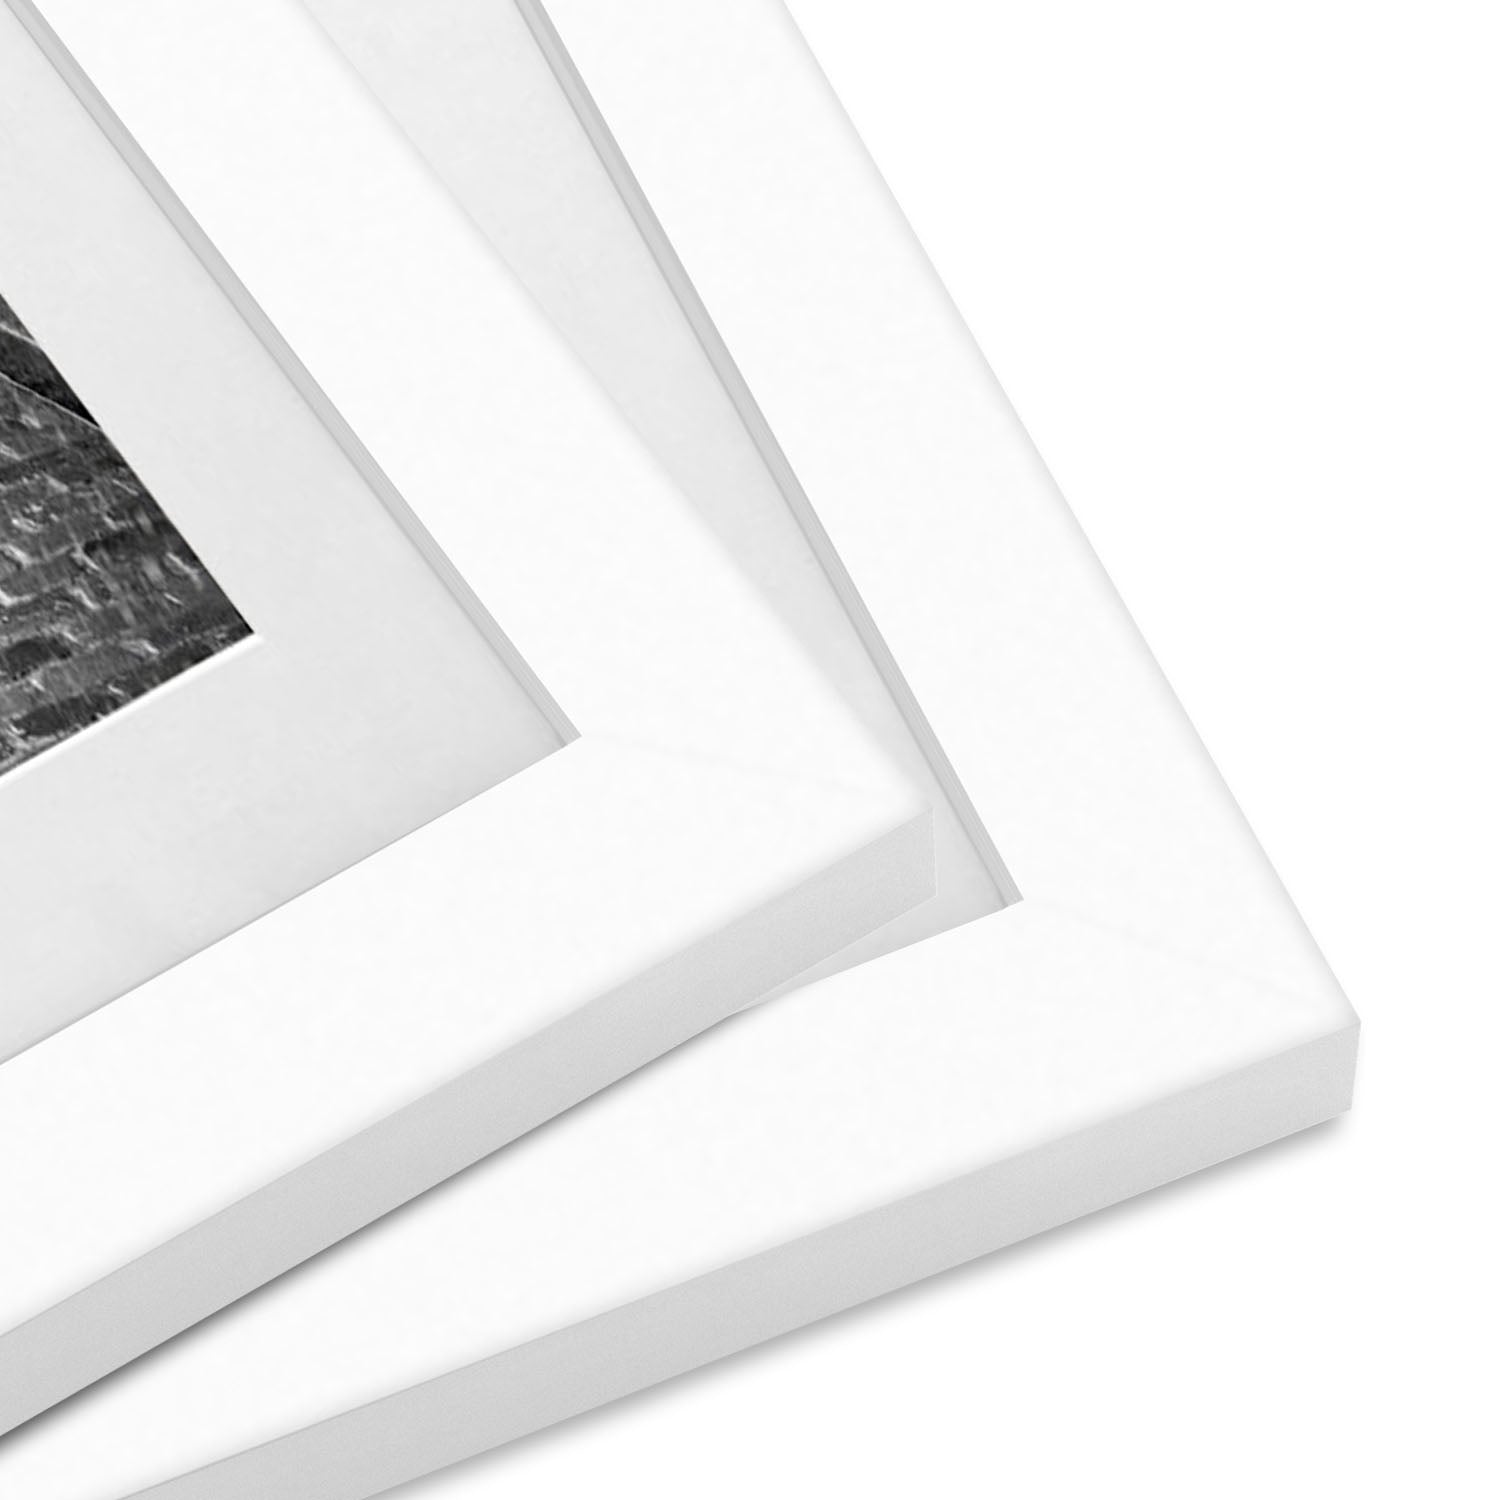 Americanflat 11x14 Oak Picture Frame 2 Pack With Shatter-resistant Glass  Cover - 11x14 Frame With Mat For 8x10 Inch Photos - 2 Pack : Target